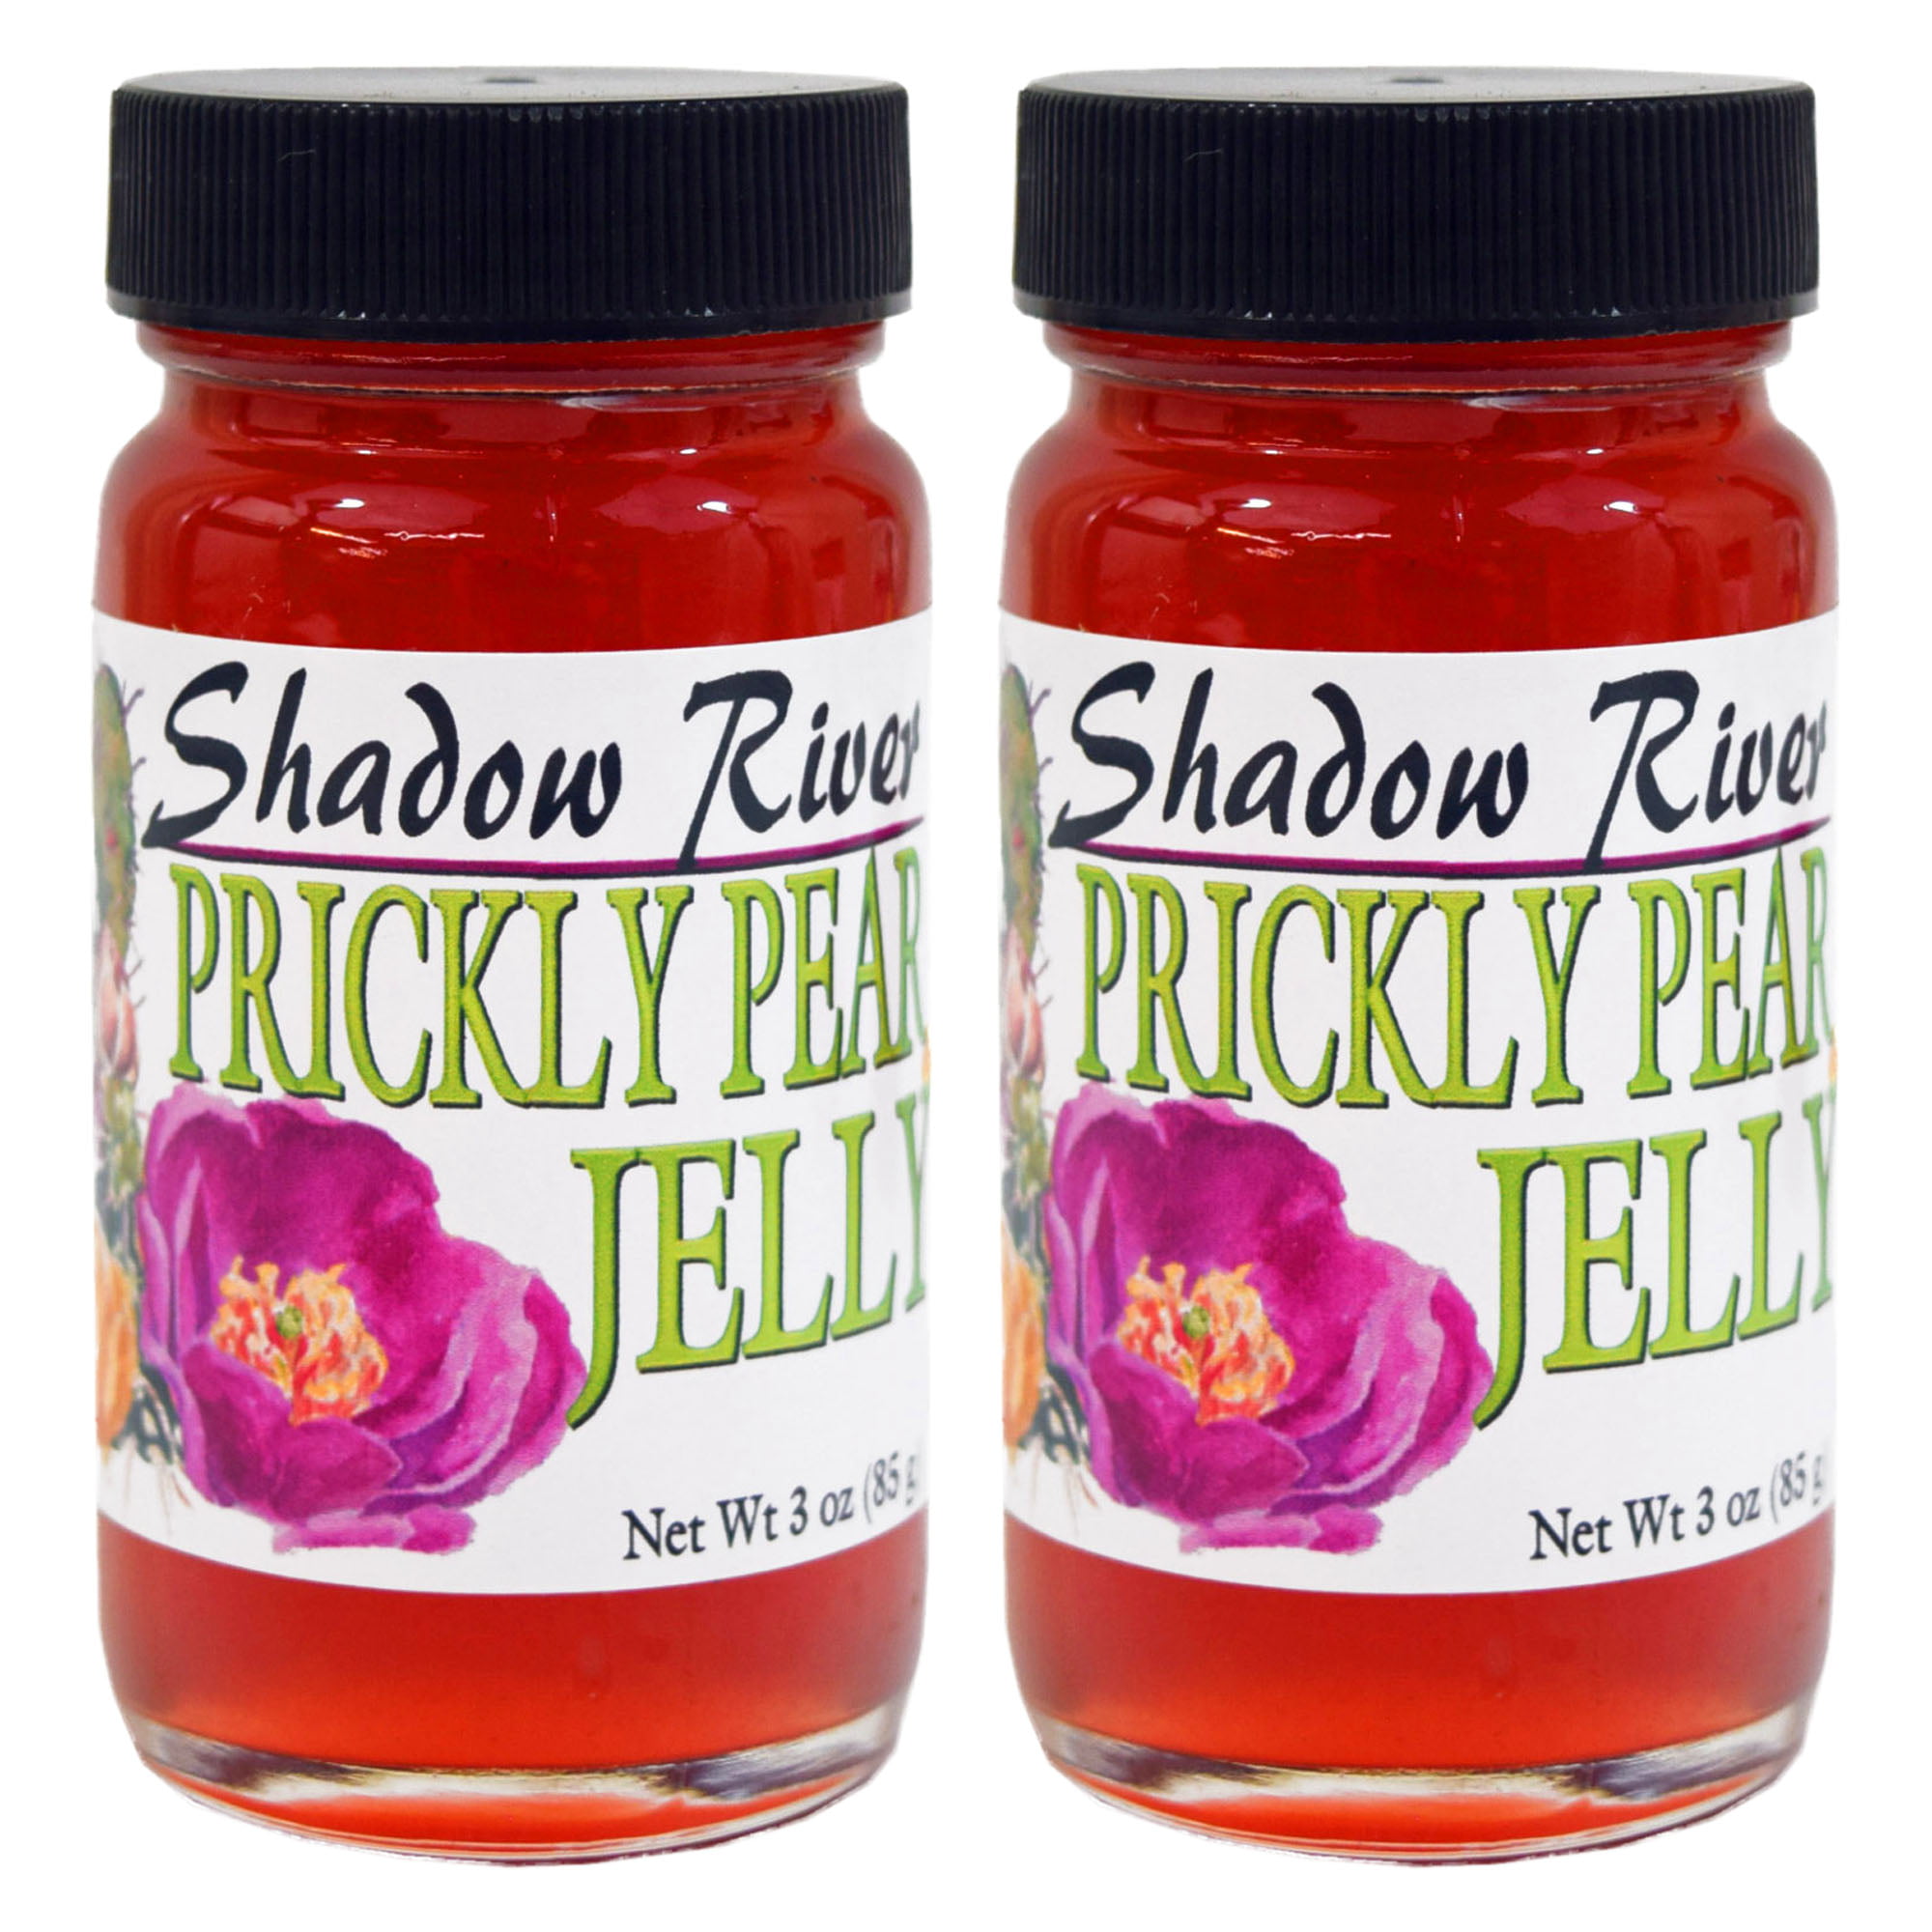 Shadow River Gourmet Prickly Pear Cactus Jelly Made From Real Cactus Fruit Juice 3 Oz Jar Pack Of 2 Walmart Com Walmart Com,How Long To Cook Meatloaf 2 Pounds